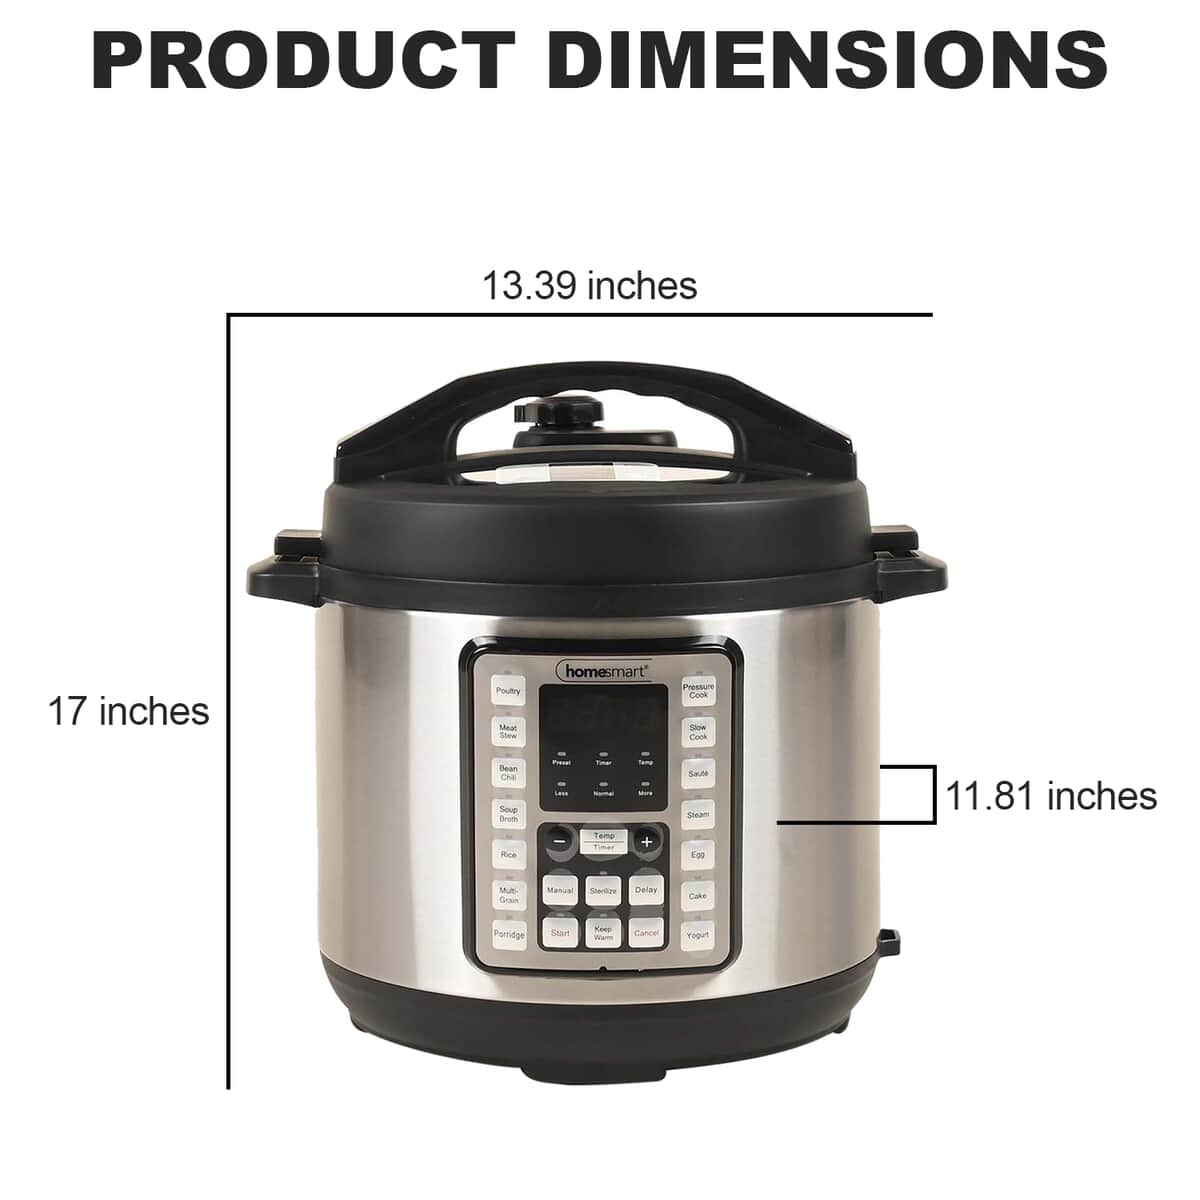 Homesmart 2 in 1 Air Fryer and Pressure Cooker in Stainless Steel (6 L) image number 3